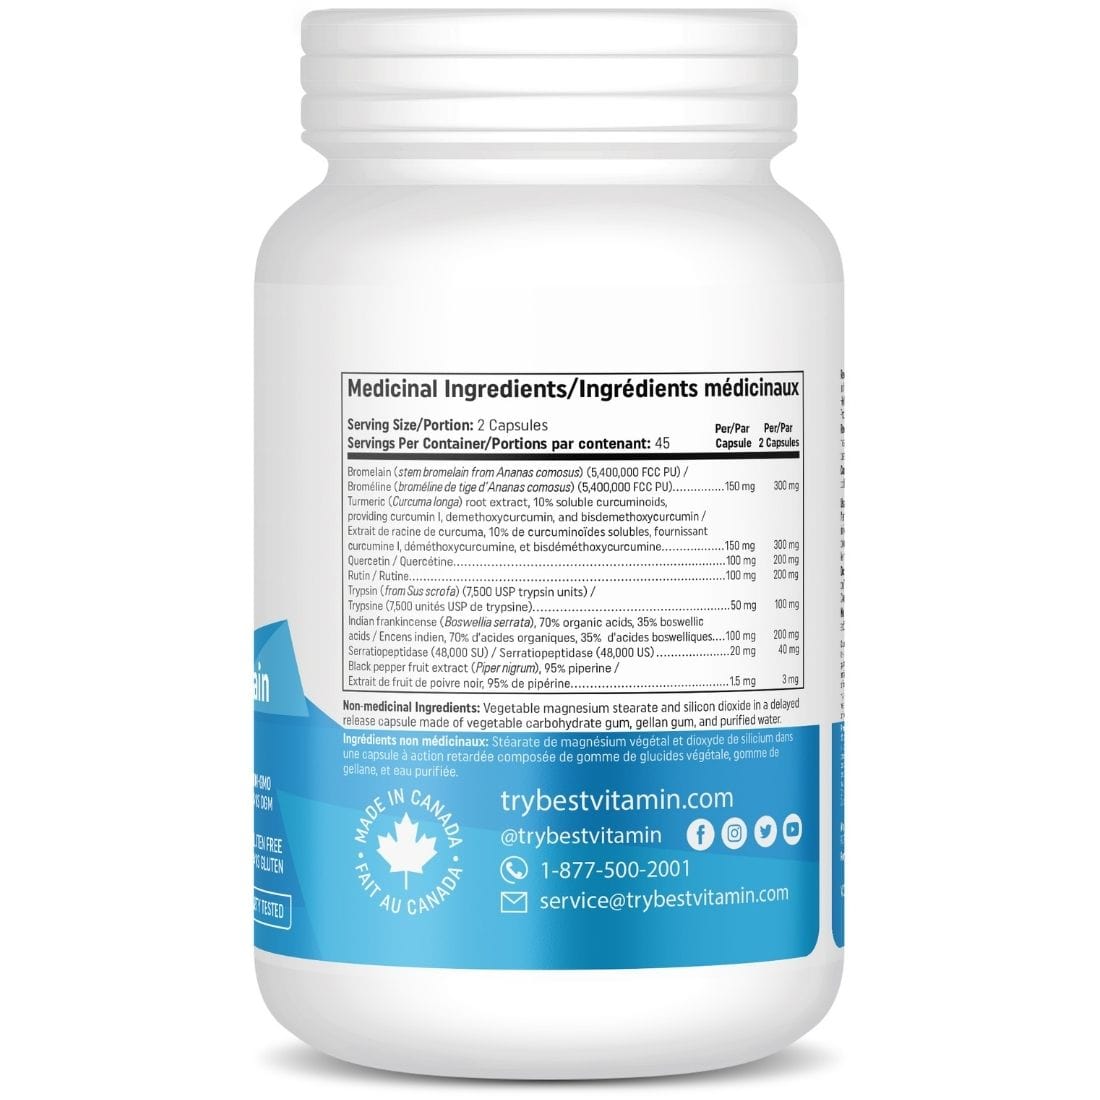 BestVitamin Best Inflammation and Pain Support, Helps relieve minor pain, swelling & inflammation